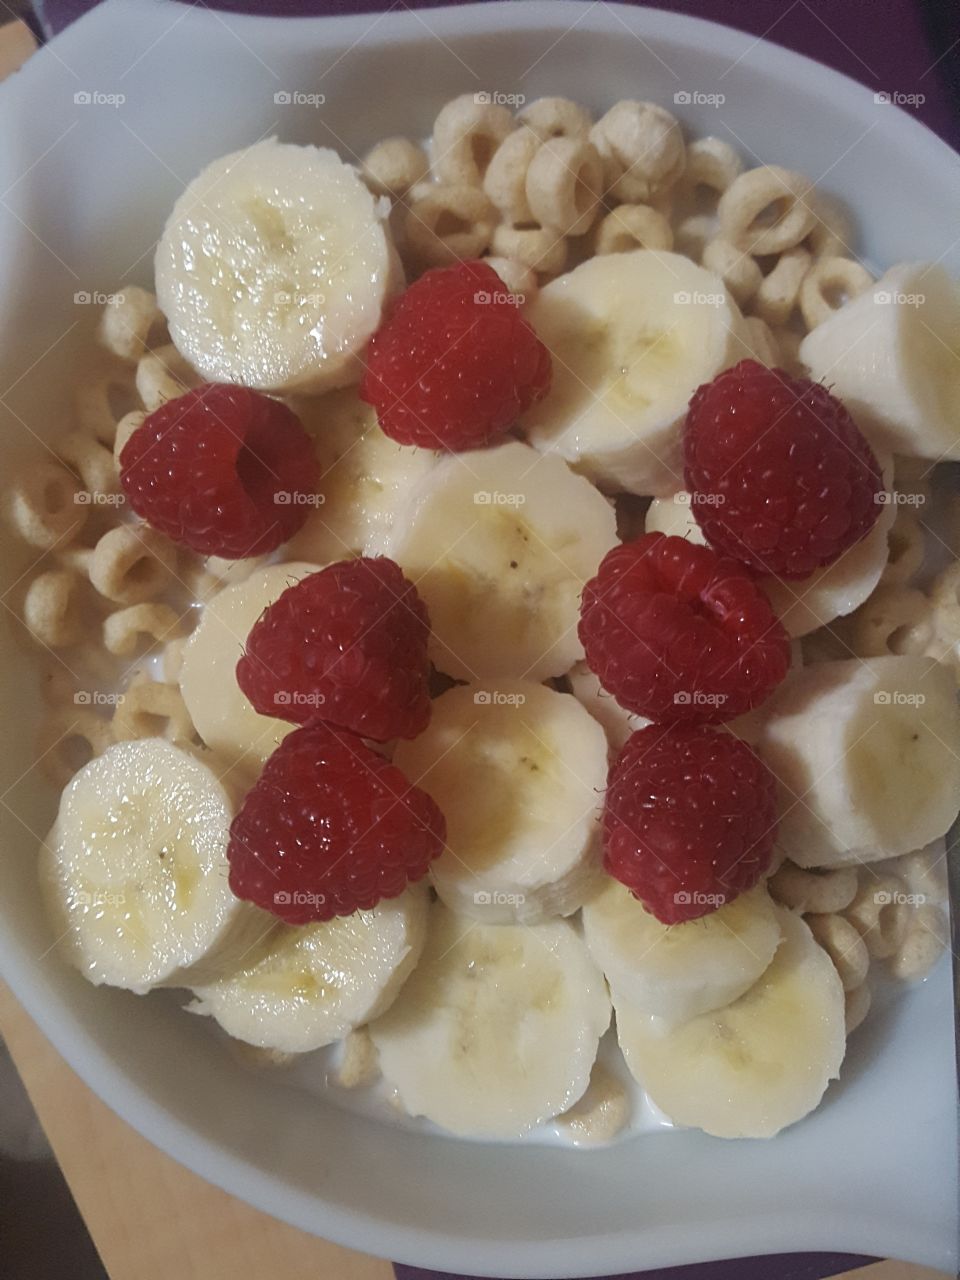 This is my morning breakfast, i  enjoy a healthy one ,whenever I eat cereal i like to add fresh fruit in it.